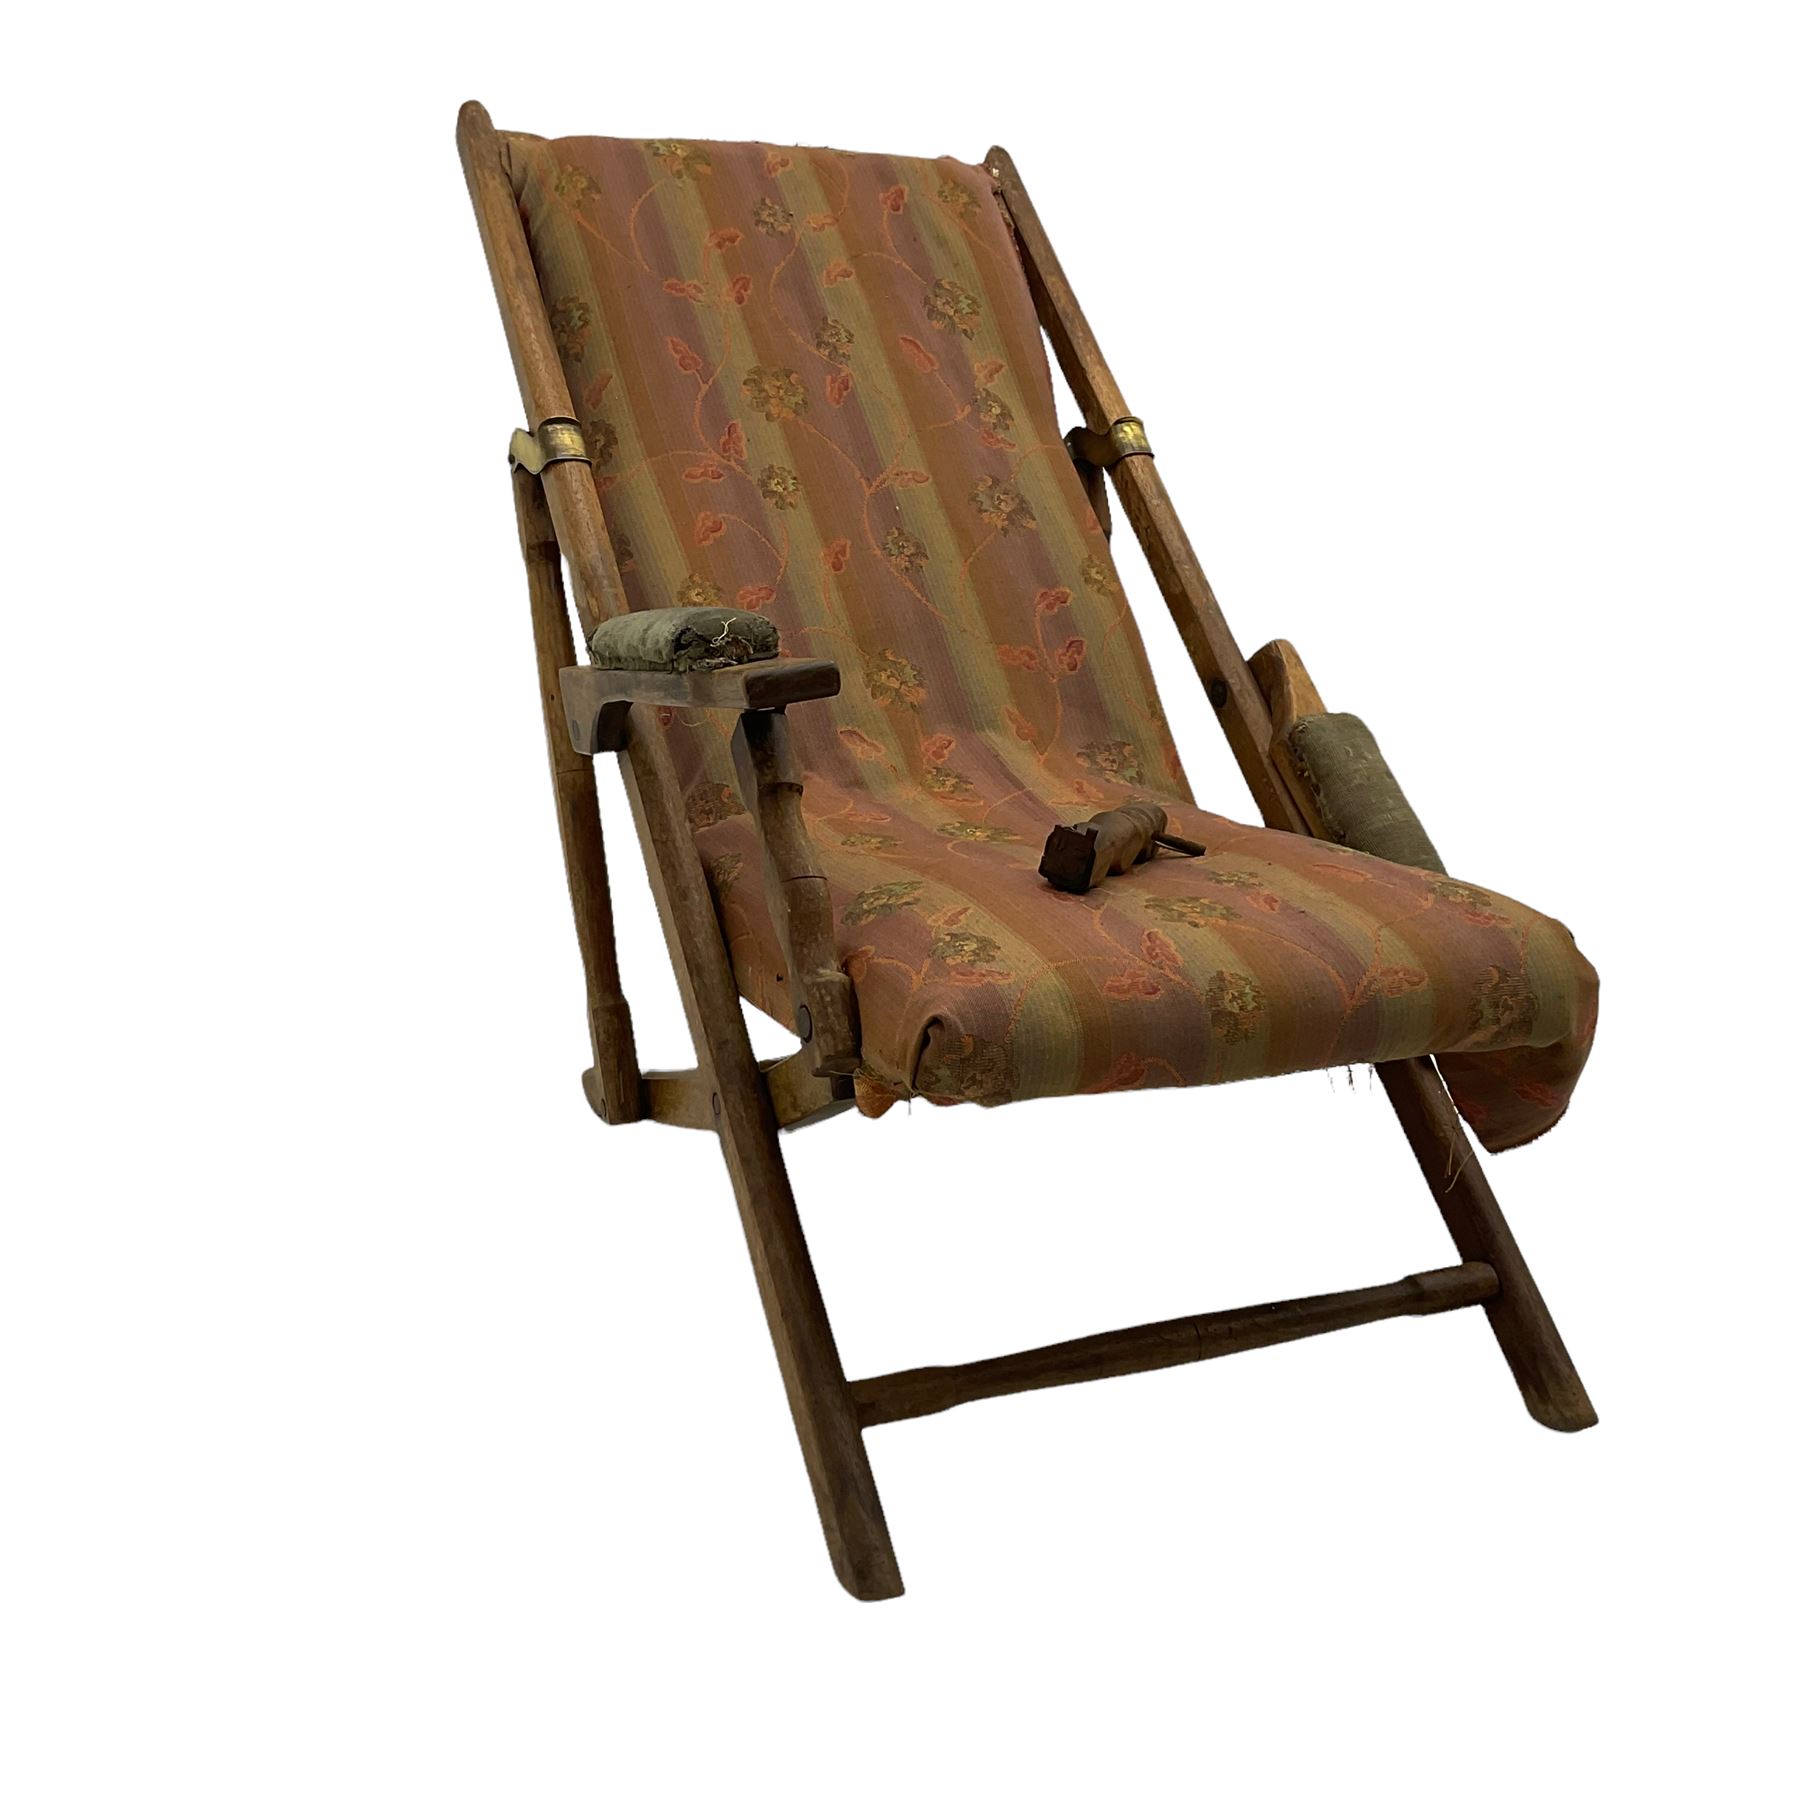 19th century teak campaign steamer or garden chair - Image 4 of 5